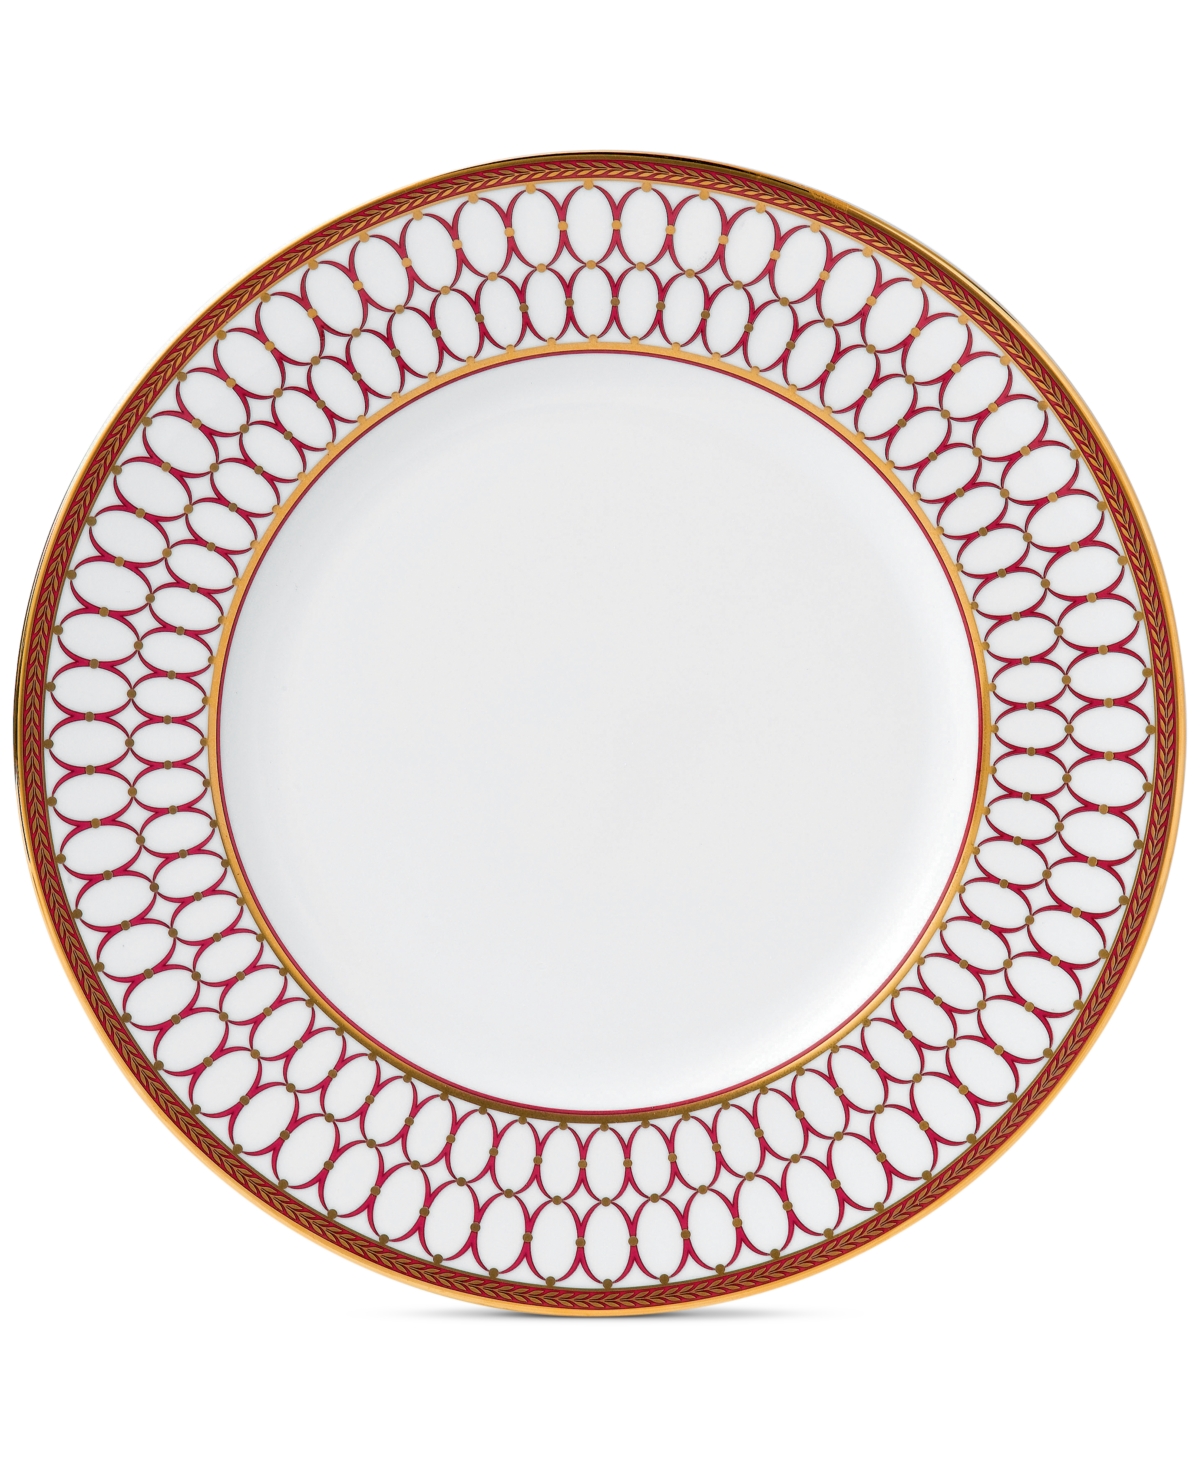 Wedgwood Renaissance Red Dinner Plate In No Color